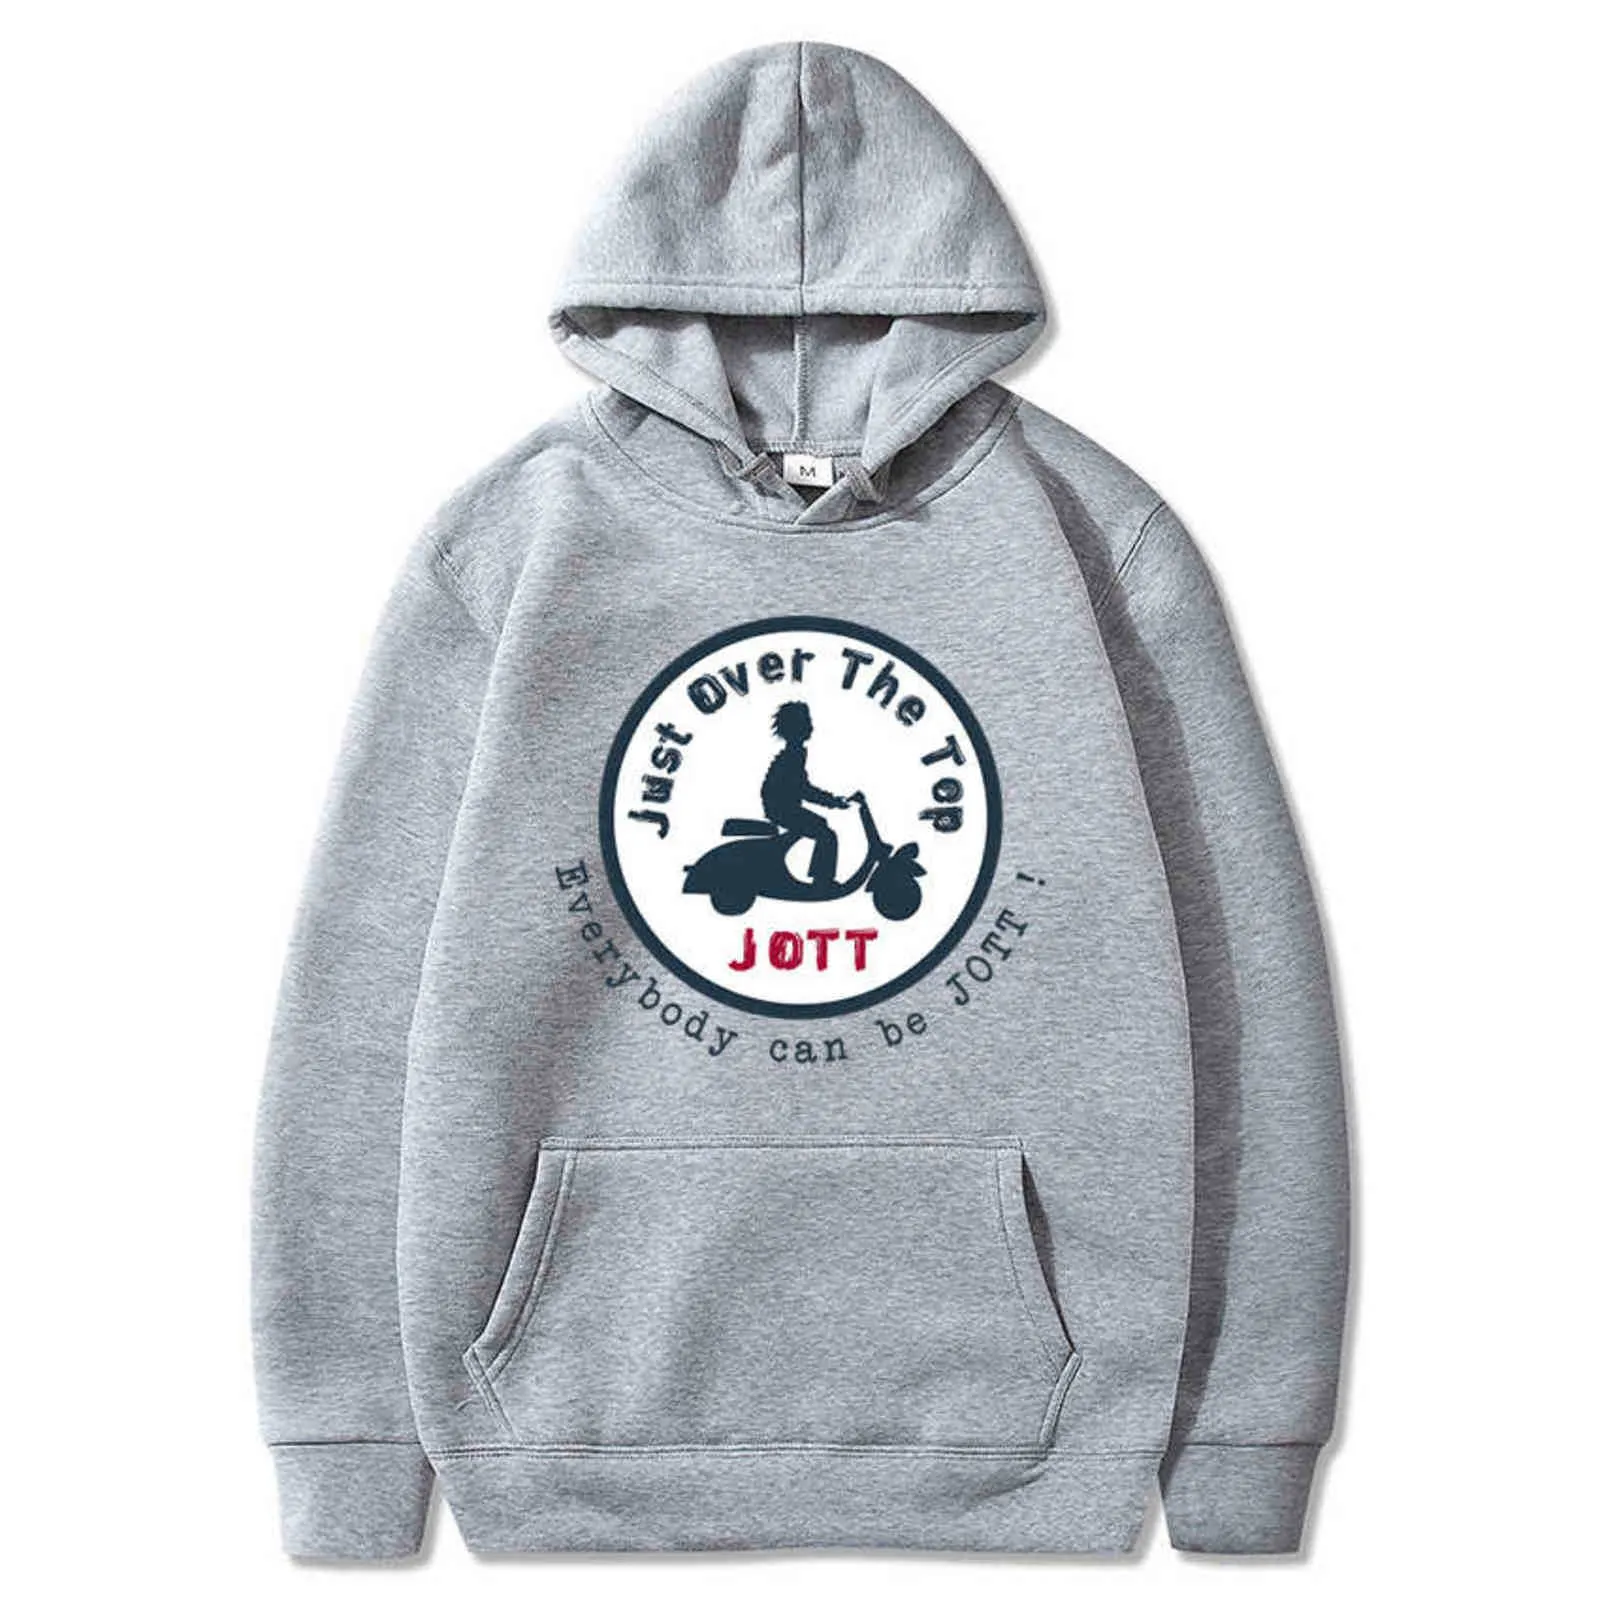 2022 Men Autumn and Winter Jott Just Over the Print Hoodie Man Design Streetwear Casual Warm Hooded with Pocket